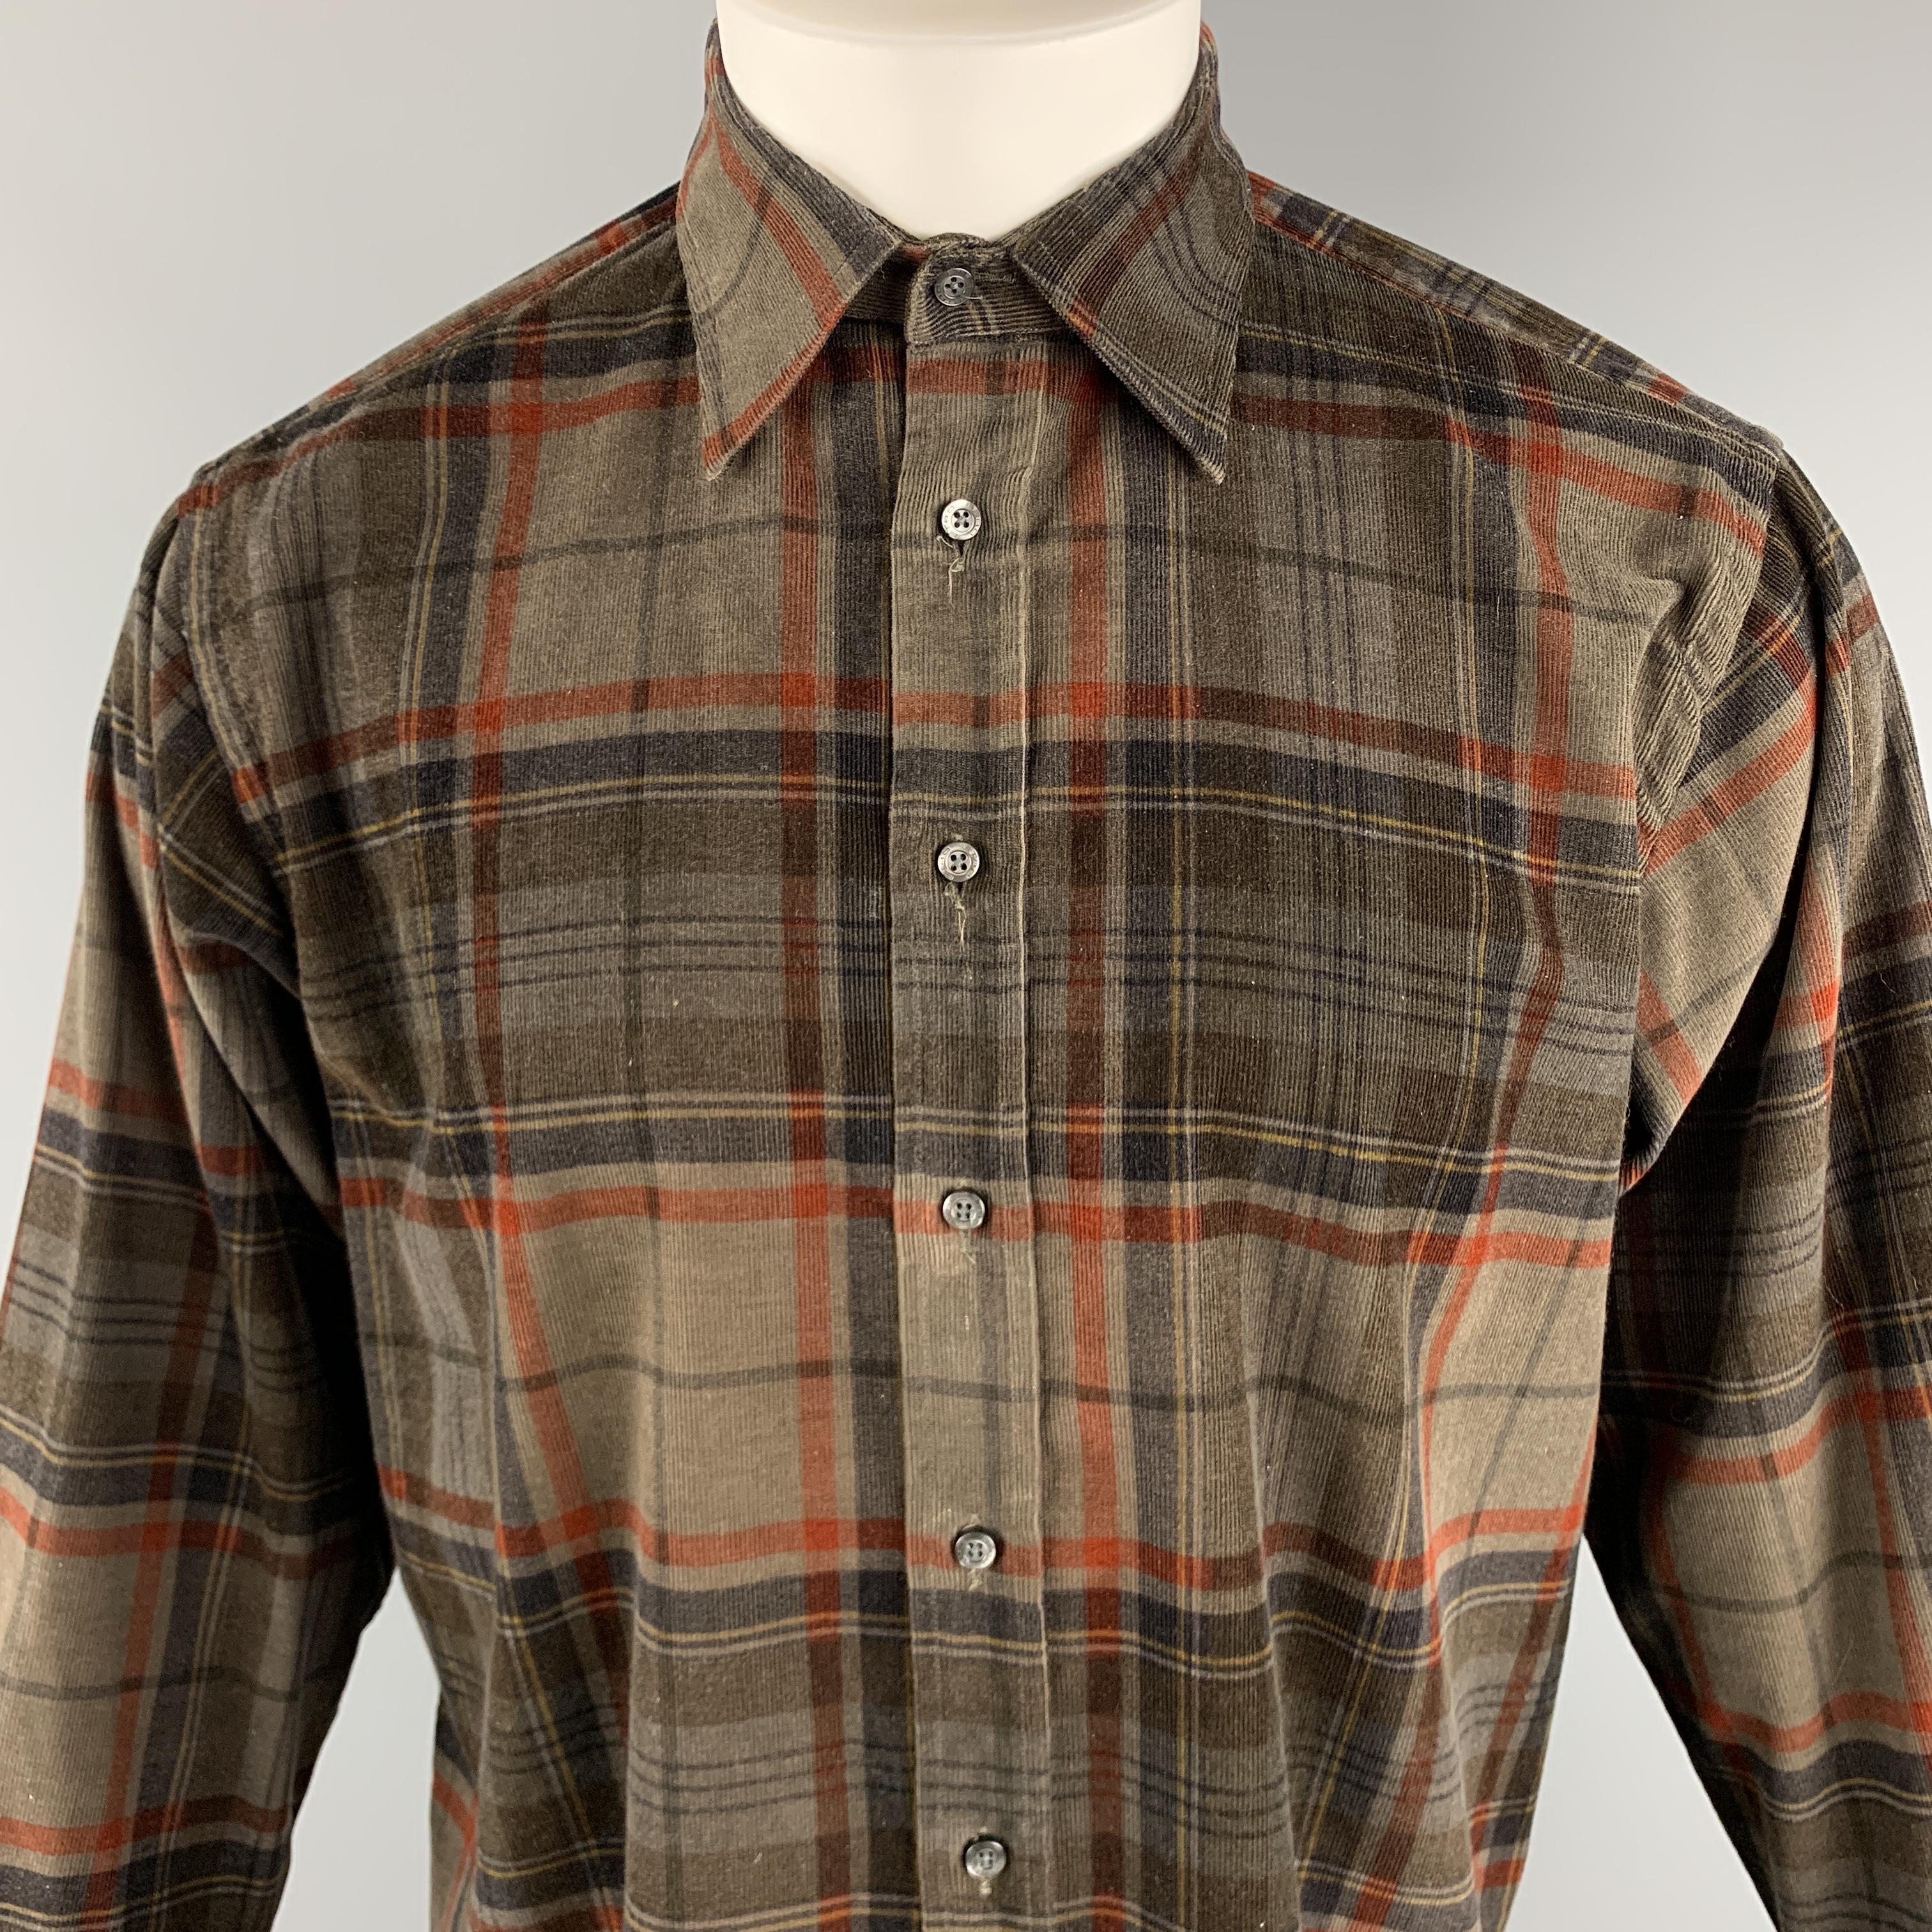 ETRO Long Sleeve Shirt comes in brown and orange tones in a plaid corduroy material, with a classic collar and buttoned cuffs, button up. Made in Italy.

Very Good Pre-Owned Condition.
Marked: 39

Measurements:

Shoulder: 18.5 in. 
Chest: 47 in.